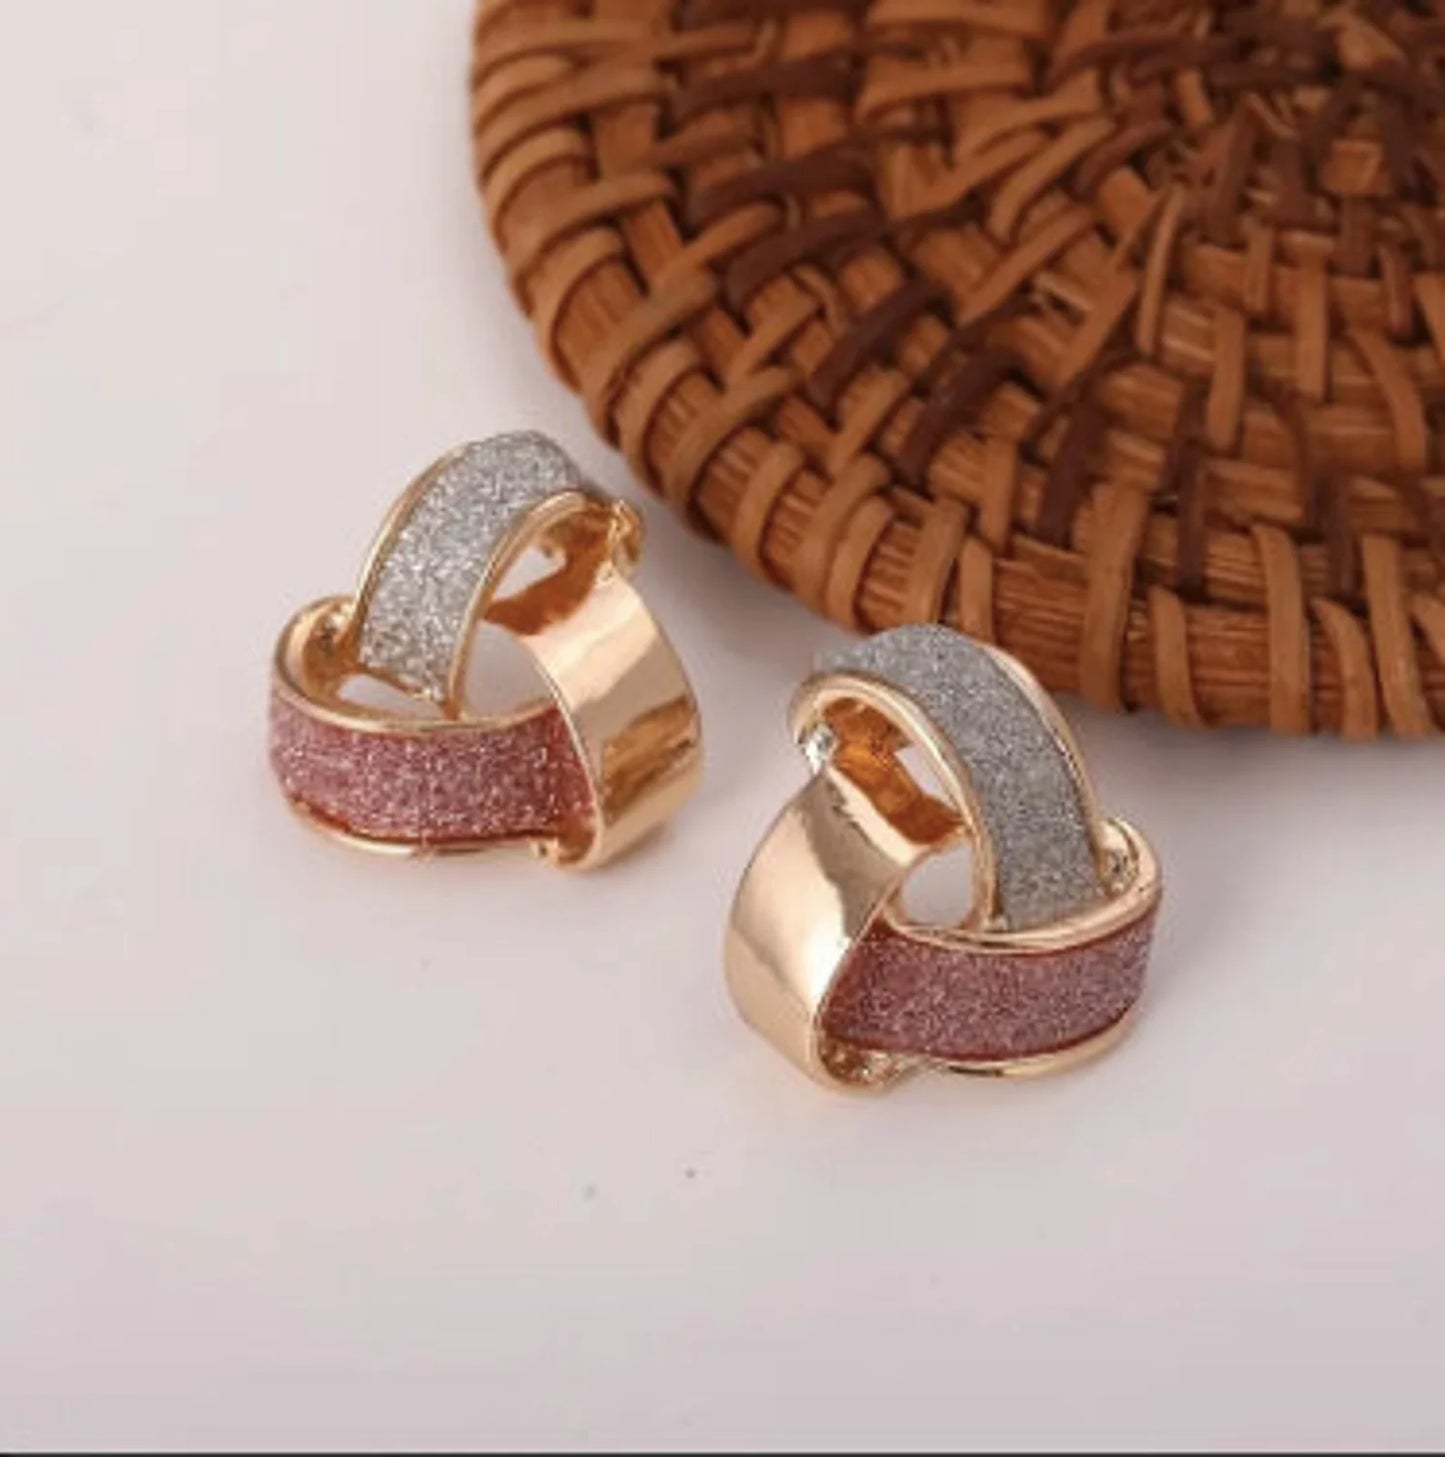 Rose Gold, Silver and Gold Geometric Earrings